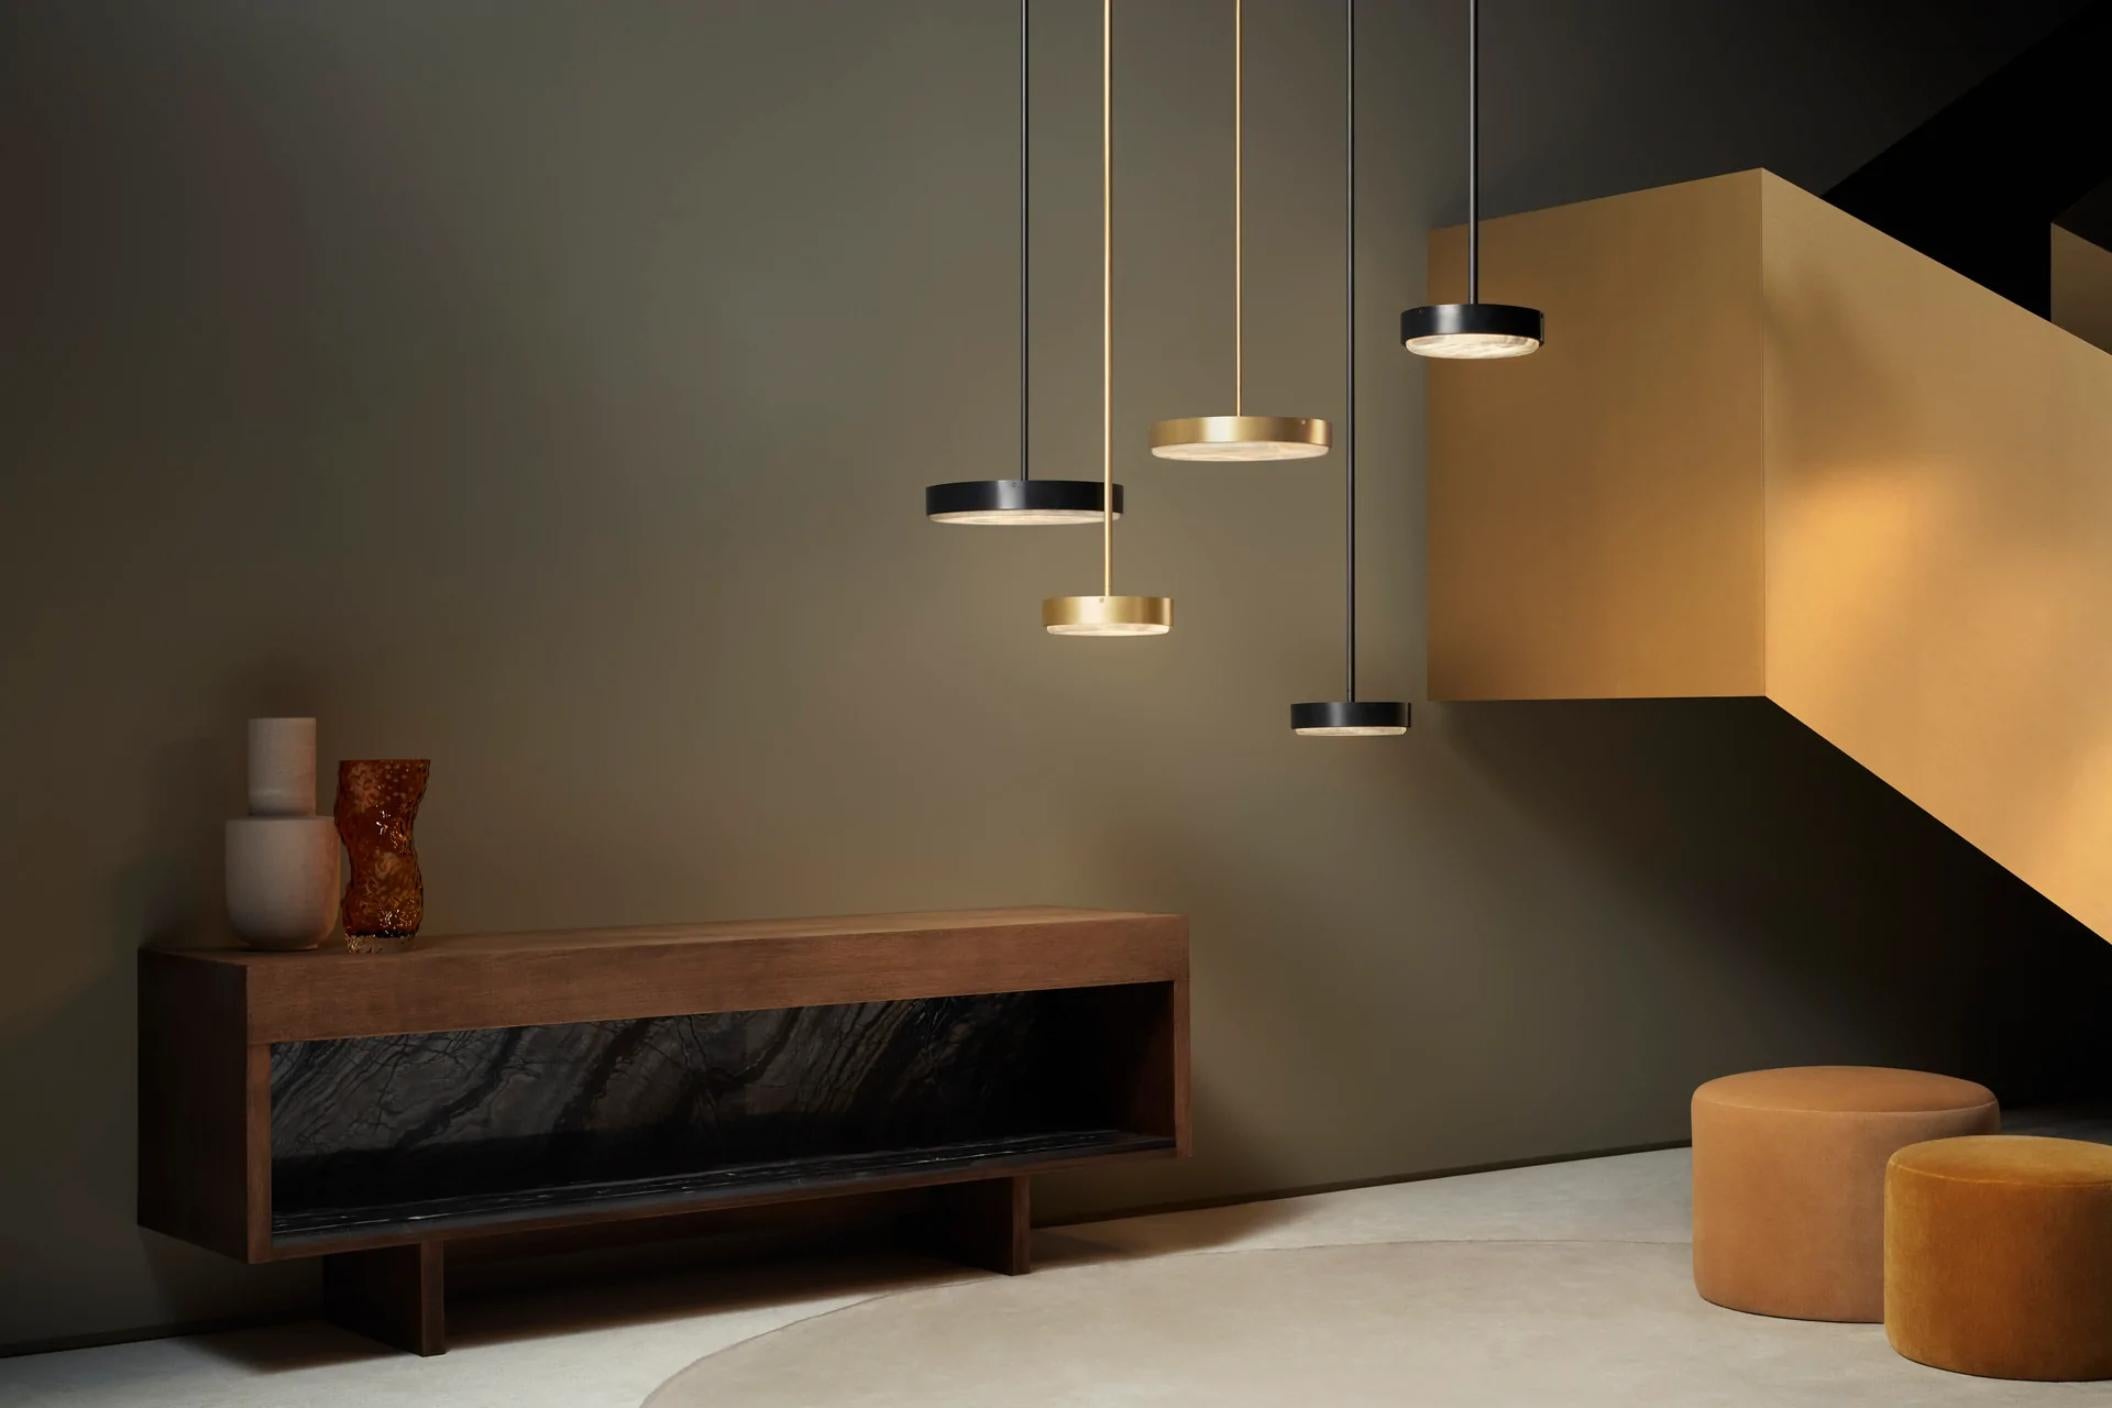 Anvers medium pendant by CTO Lighting
Materials: satin brass with alabaster stone
Also available in bronze with alabaster stone
Dimensions: H 6.8 x W 33.5 cm 

All our lamps can be wired according to each country. If sold to the USA it will be wired